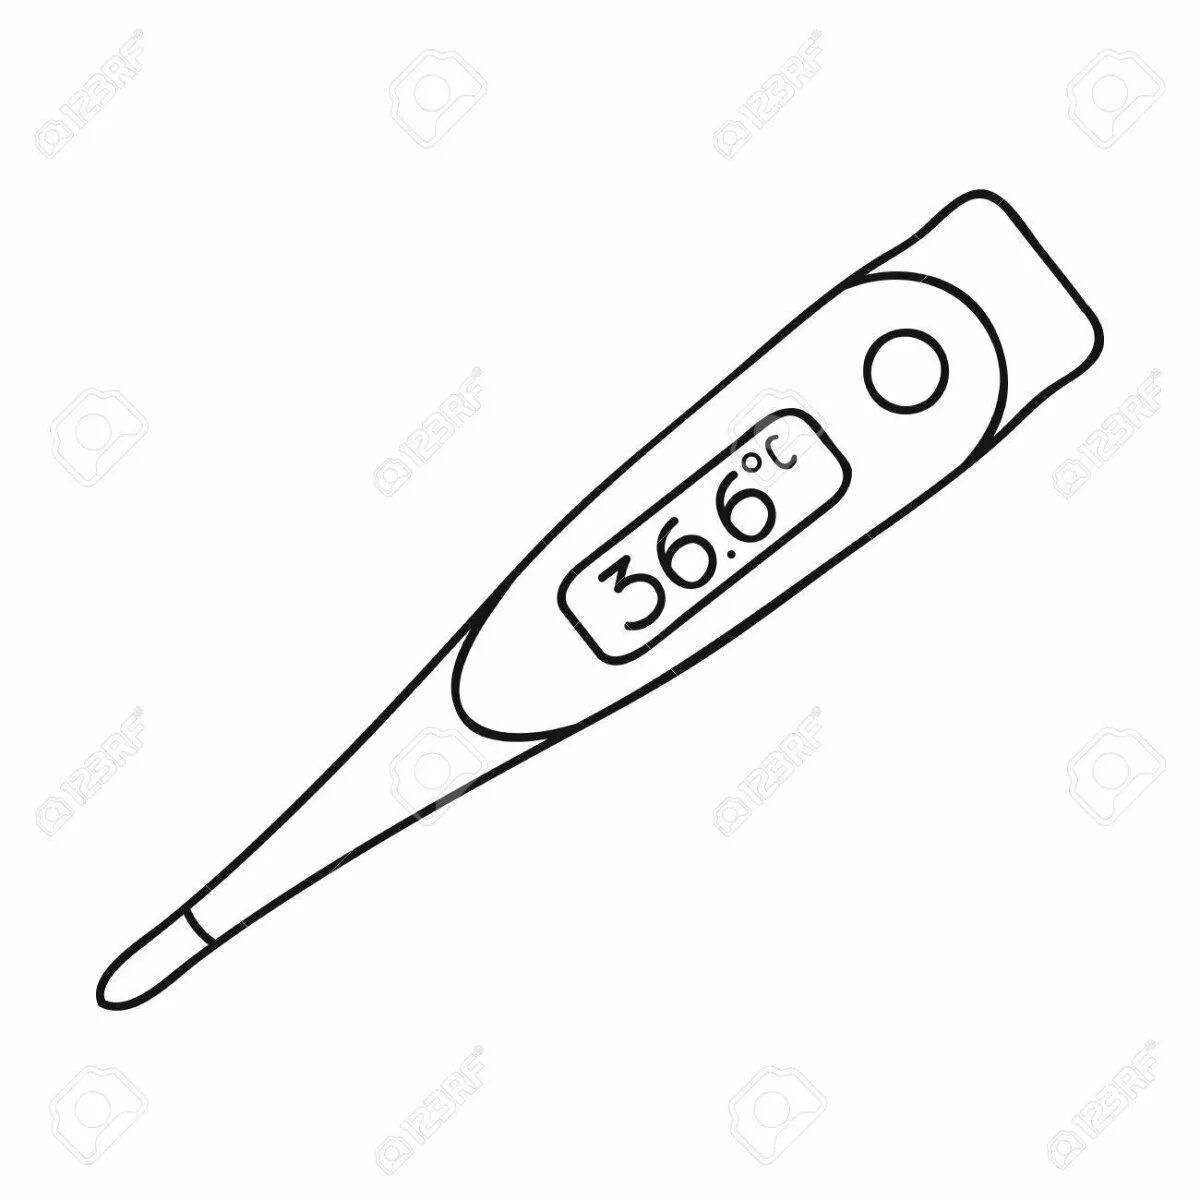 Creative thermometer coloring book for kids